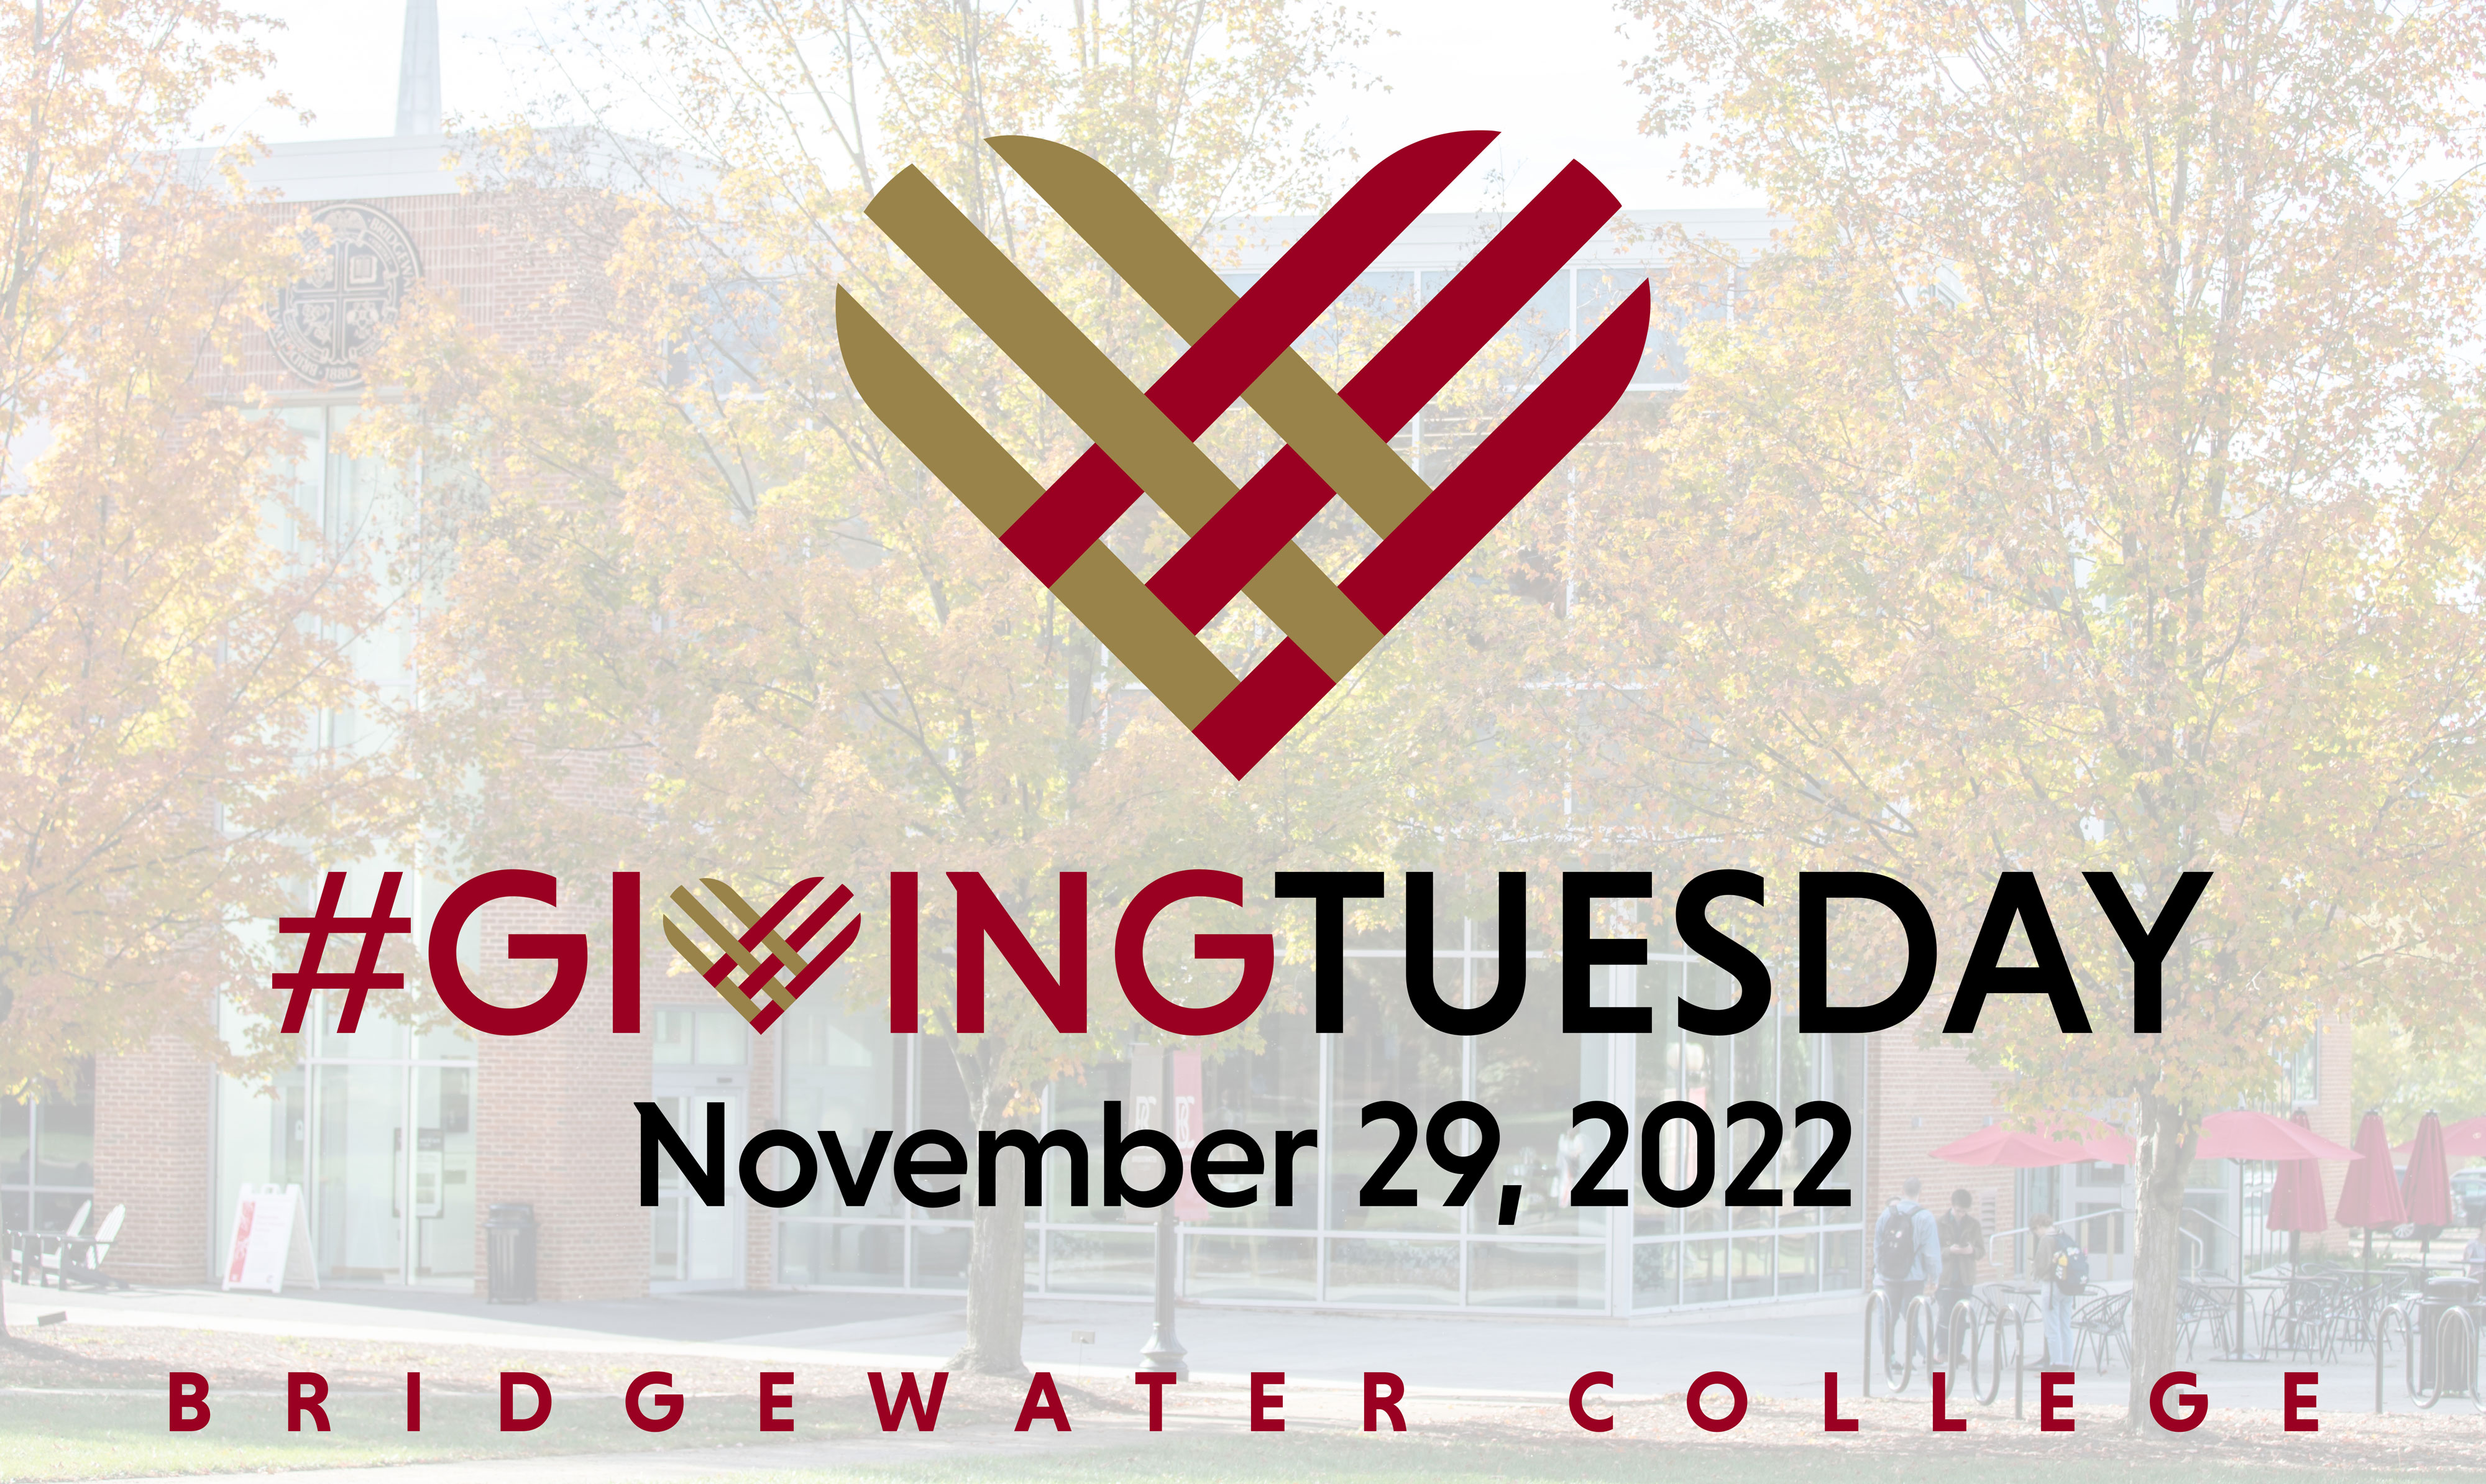 Bridgewater College - Giving Tuesday 2022